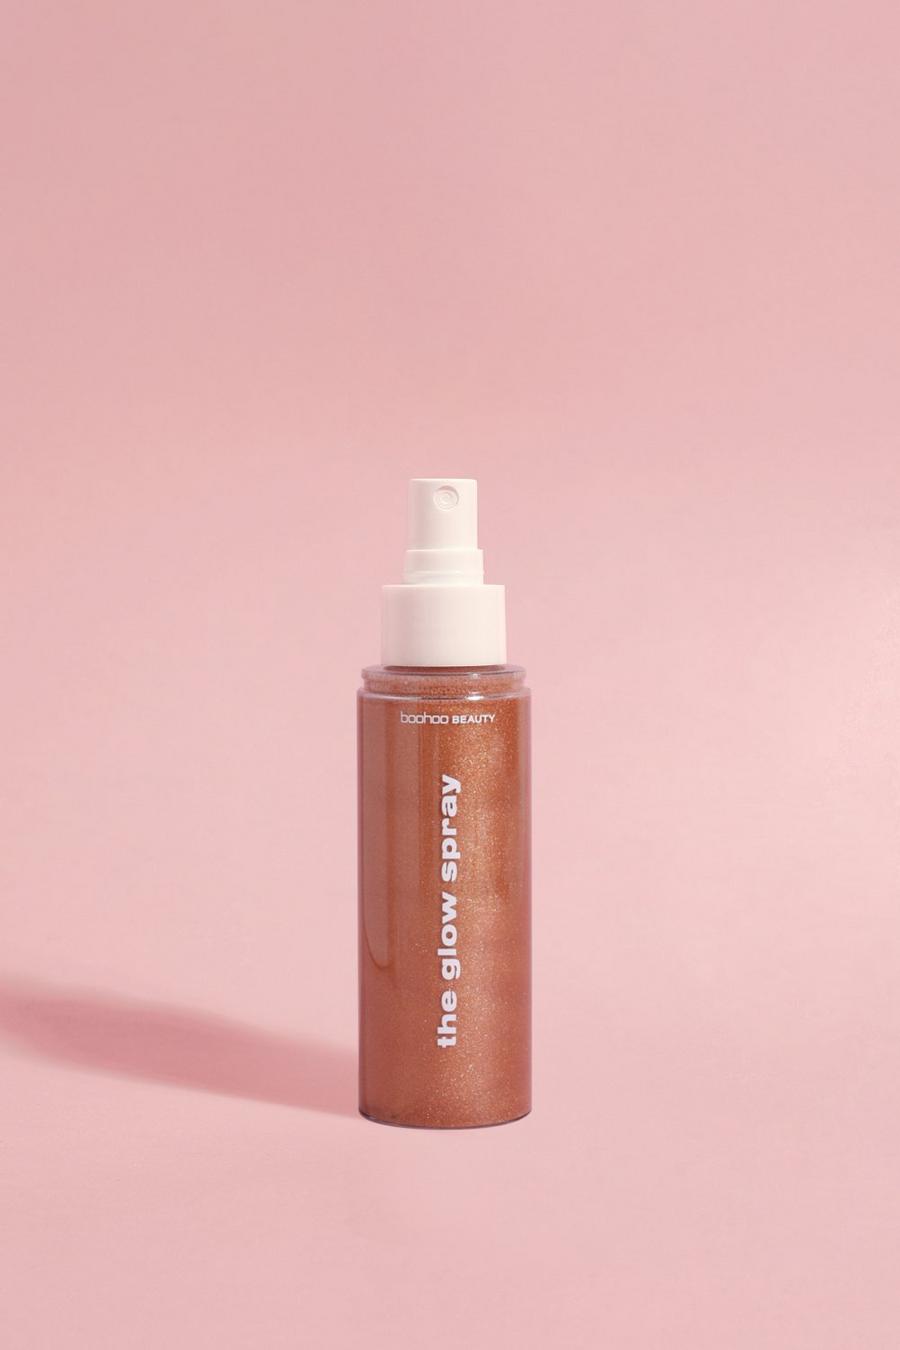 Boohoo Beauty - Mist fissante Ultra Glow, Rose gold metálicos image number 1